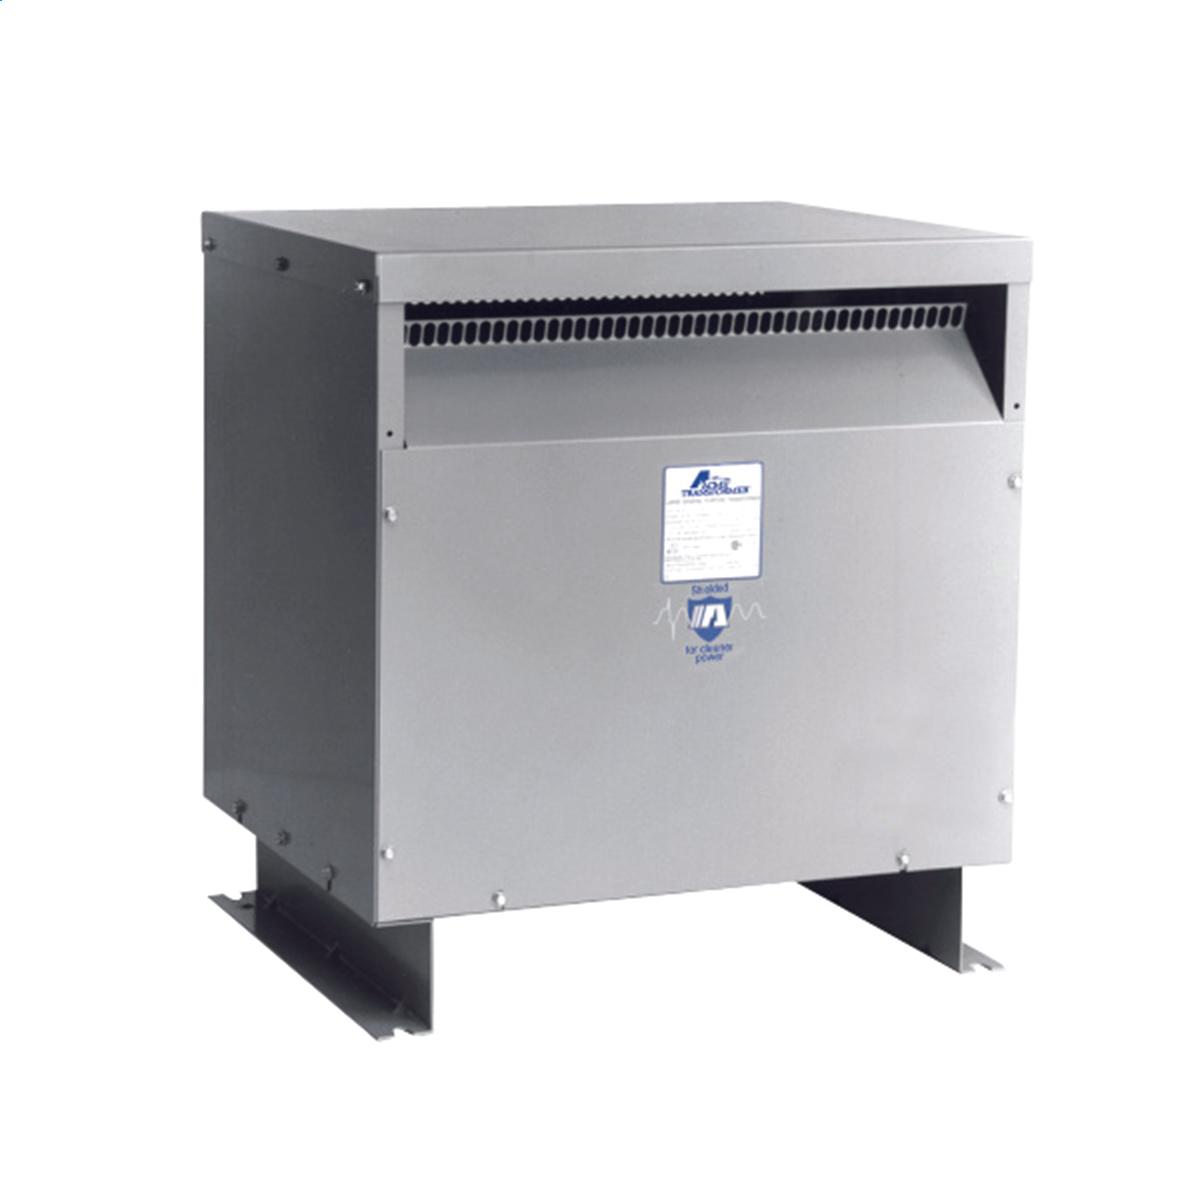 Hubbell WB015K05 Medium Voltage Transformer - Single Phase, 4160 - 240/480V, 15kVA  ; Lower operating cost over Liquid-filled ; No additional fireproofing or venting ; Long life expectancy ; Smaller, lighter easy to maintain